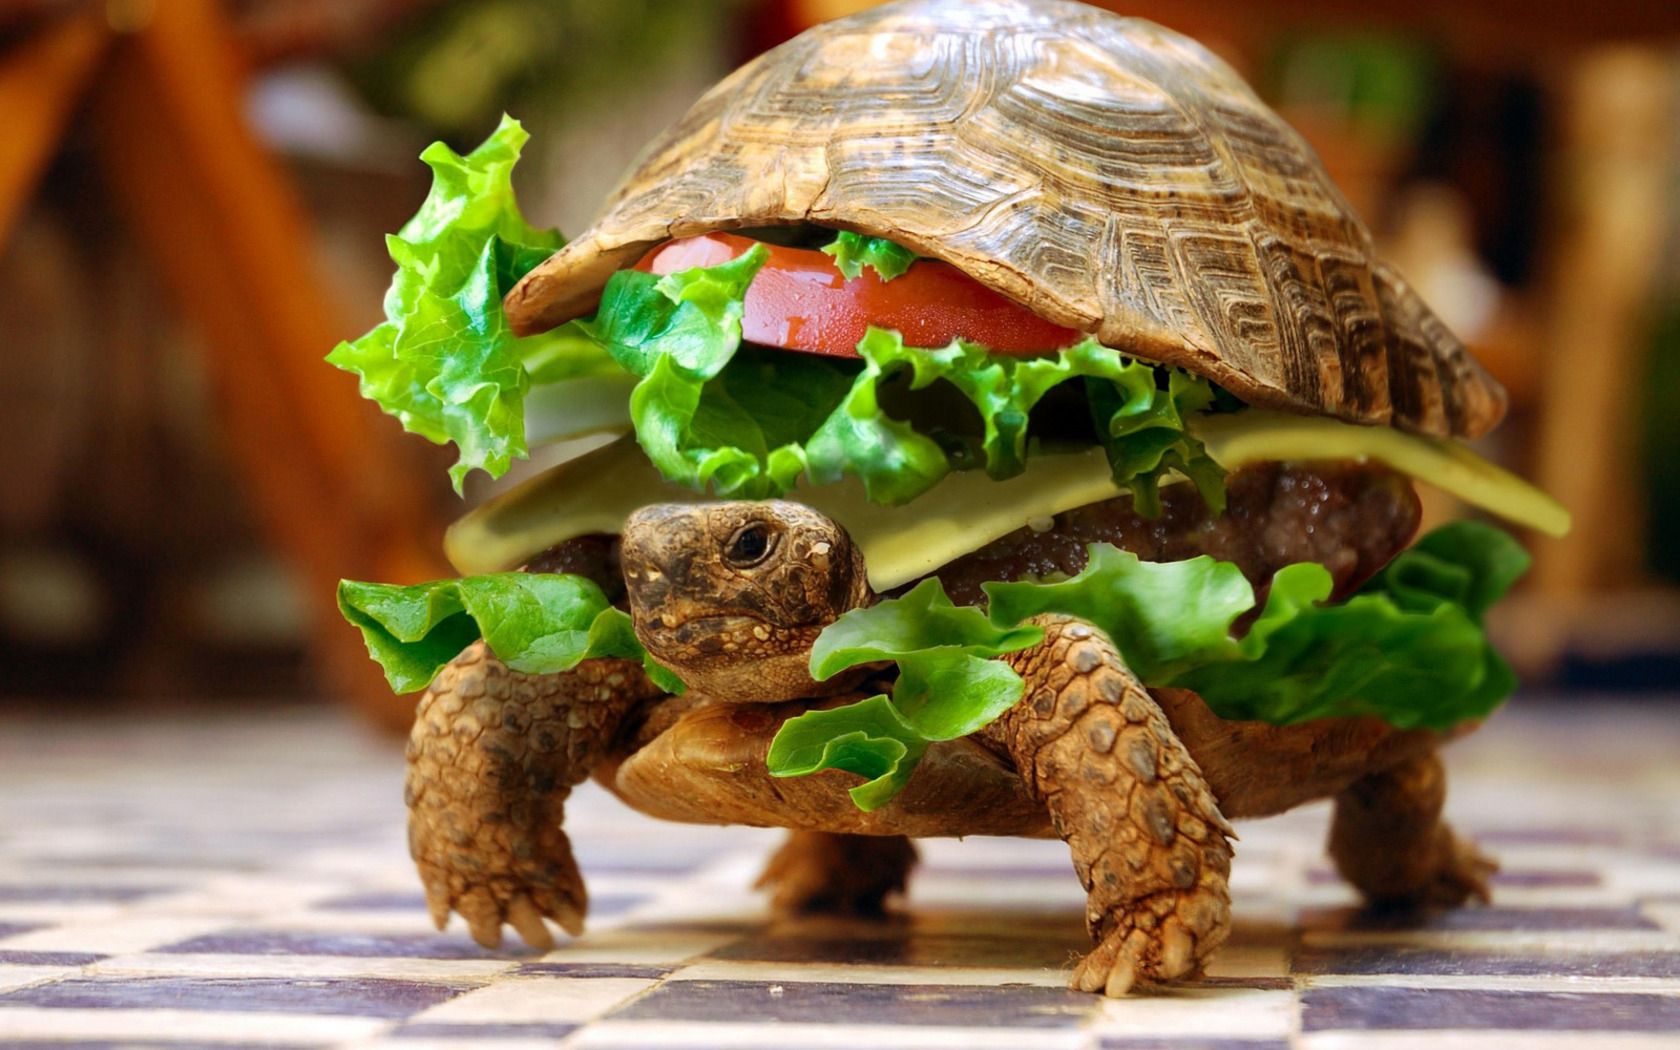 Delicious turtle wallpaper and image, picture, photo. Animal wallpaper, Funny photohop, Cute animals